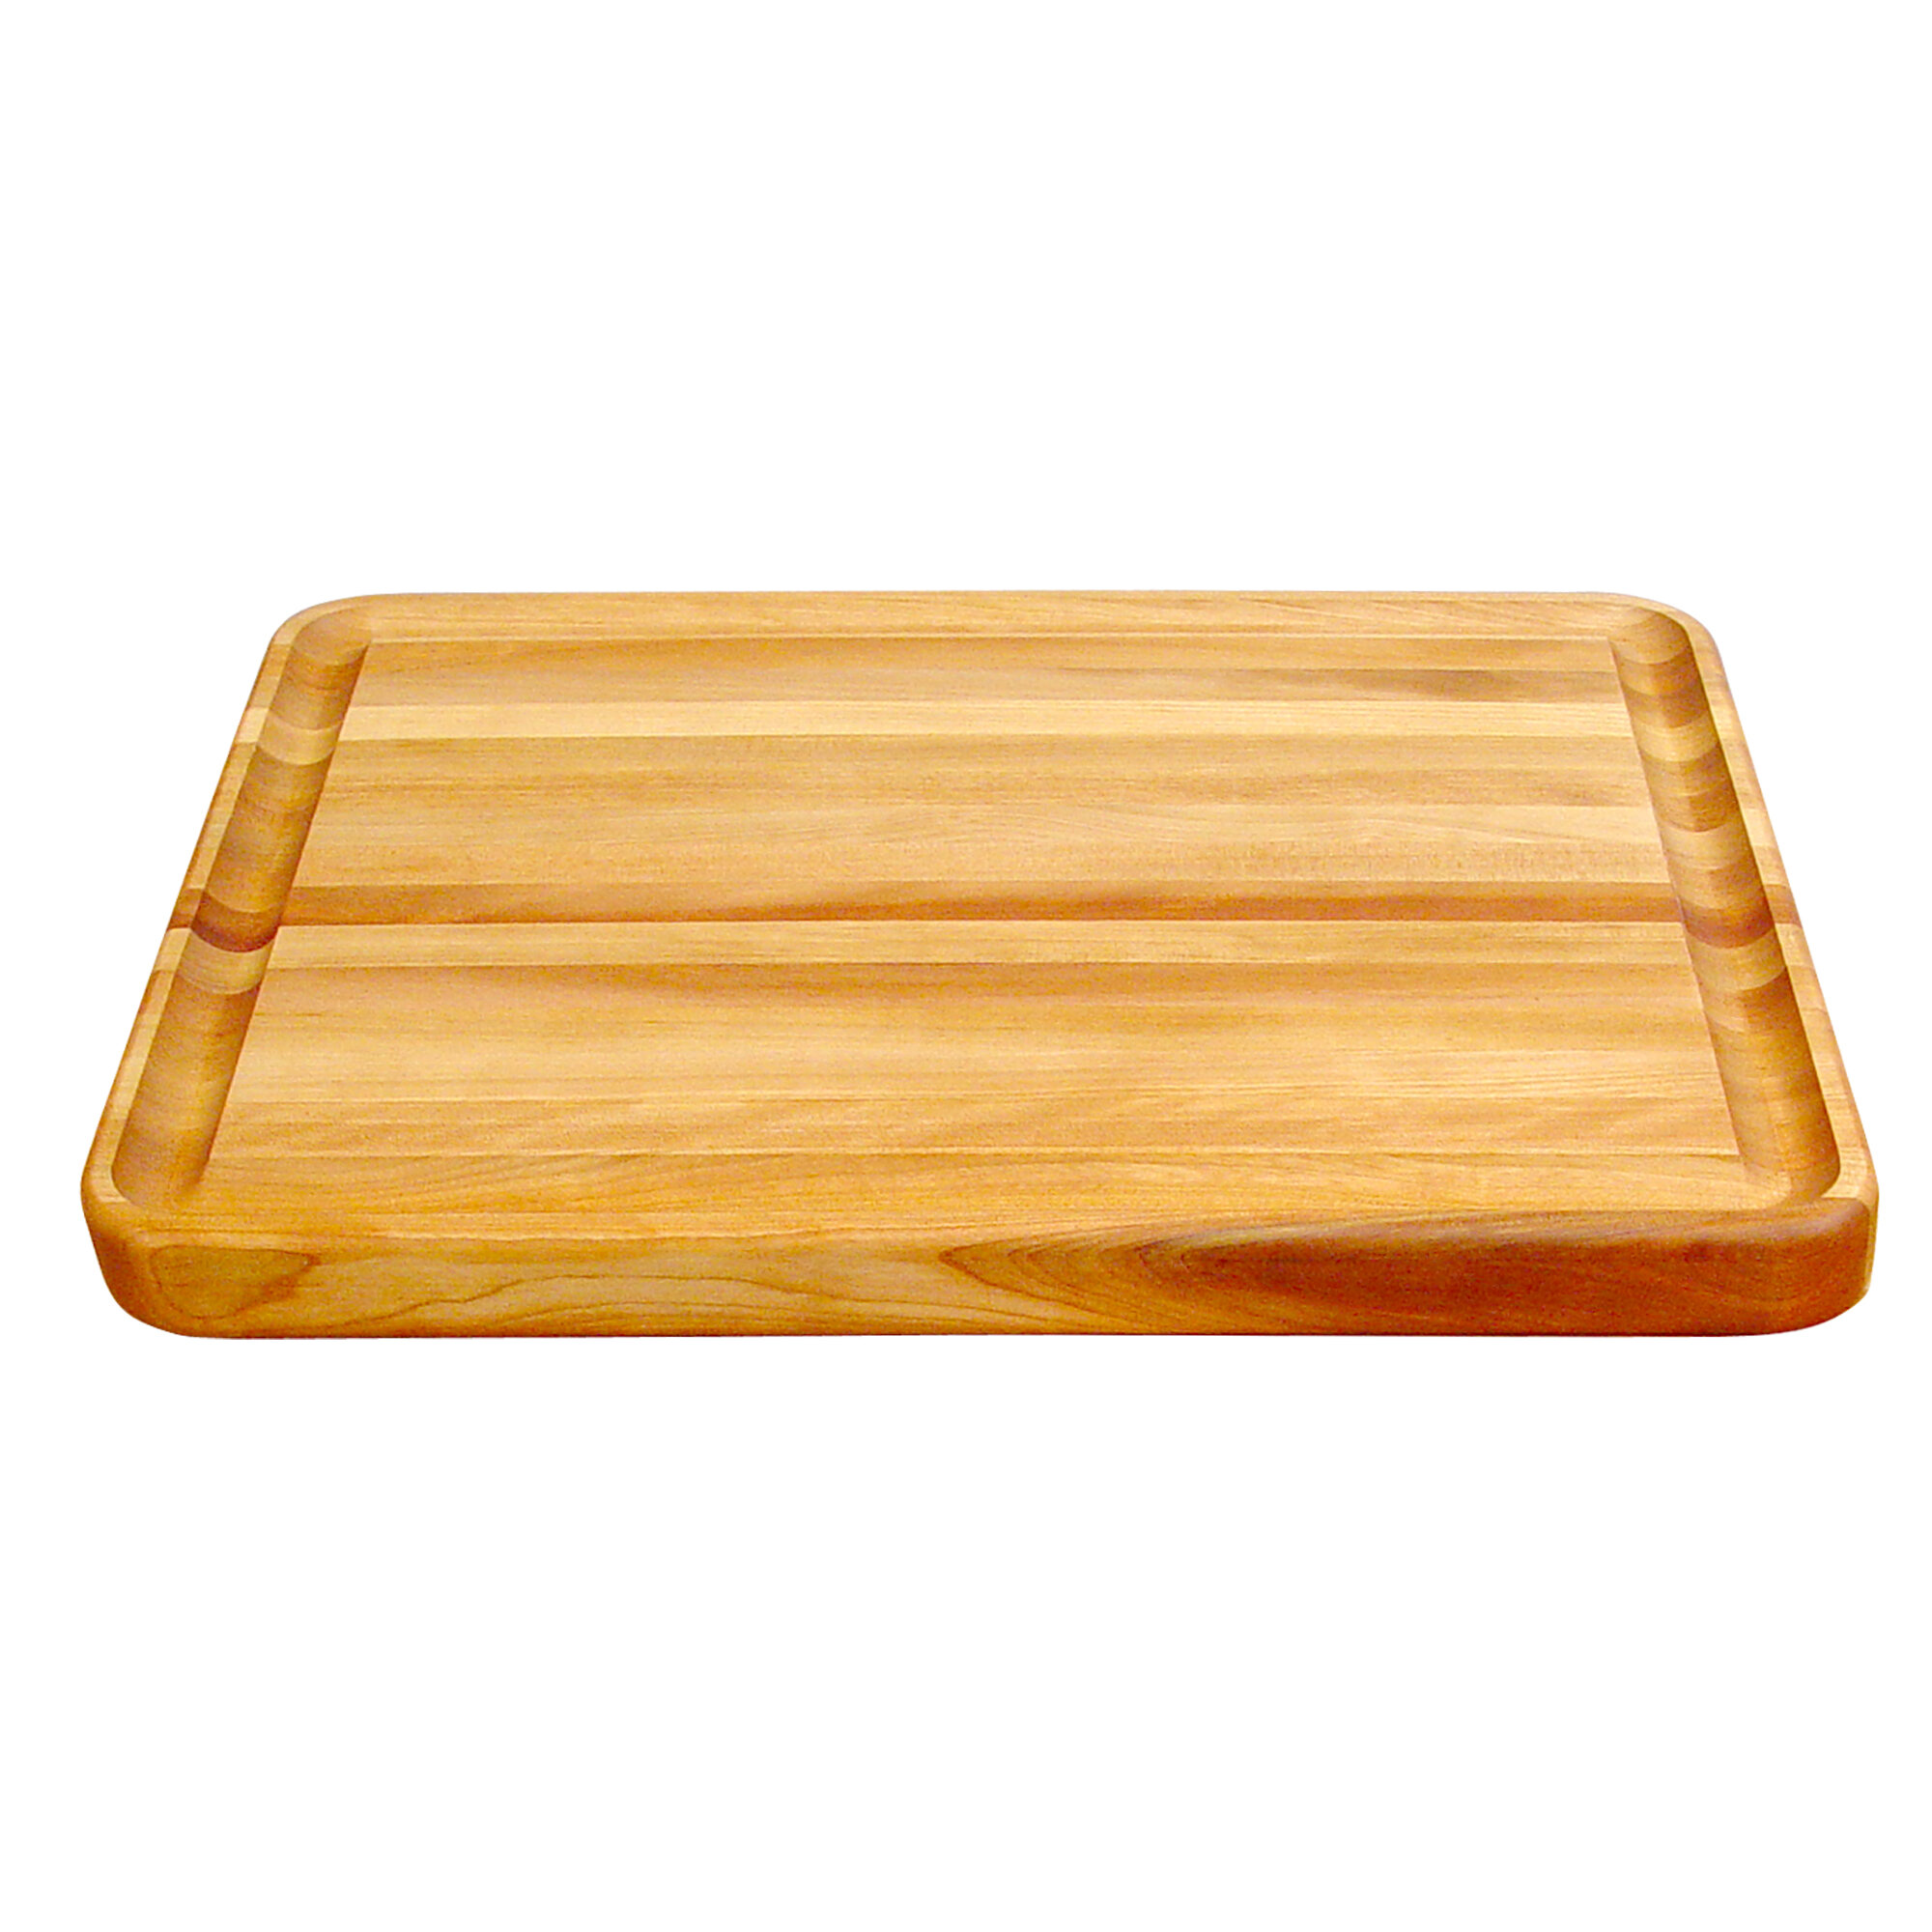 Can You Make A Professional Looking Cutting Board?